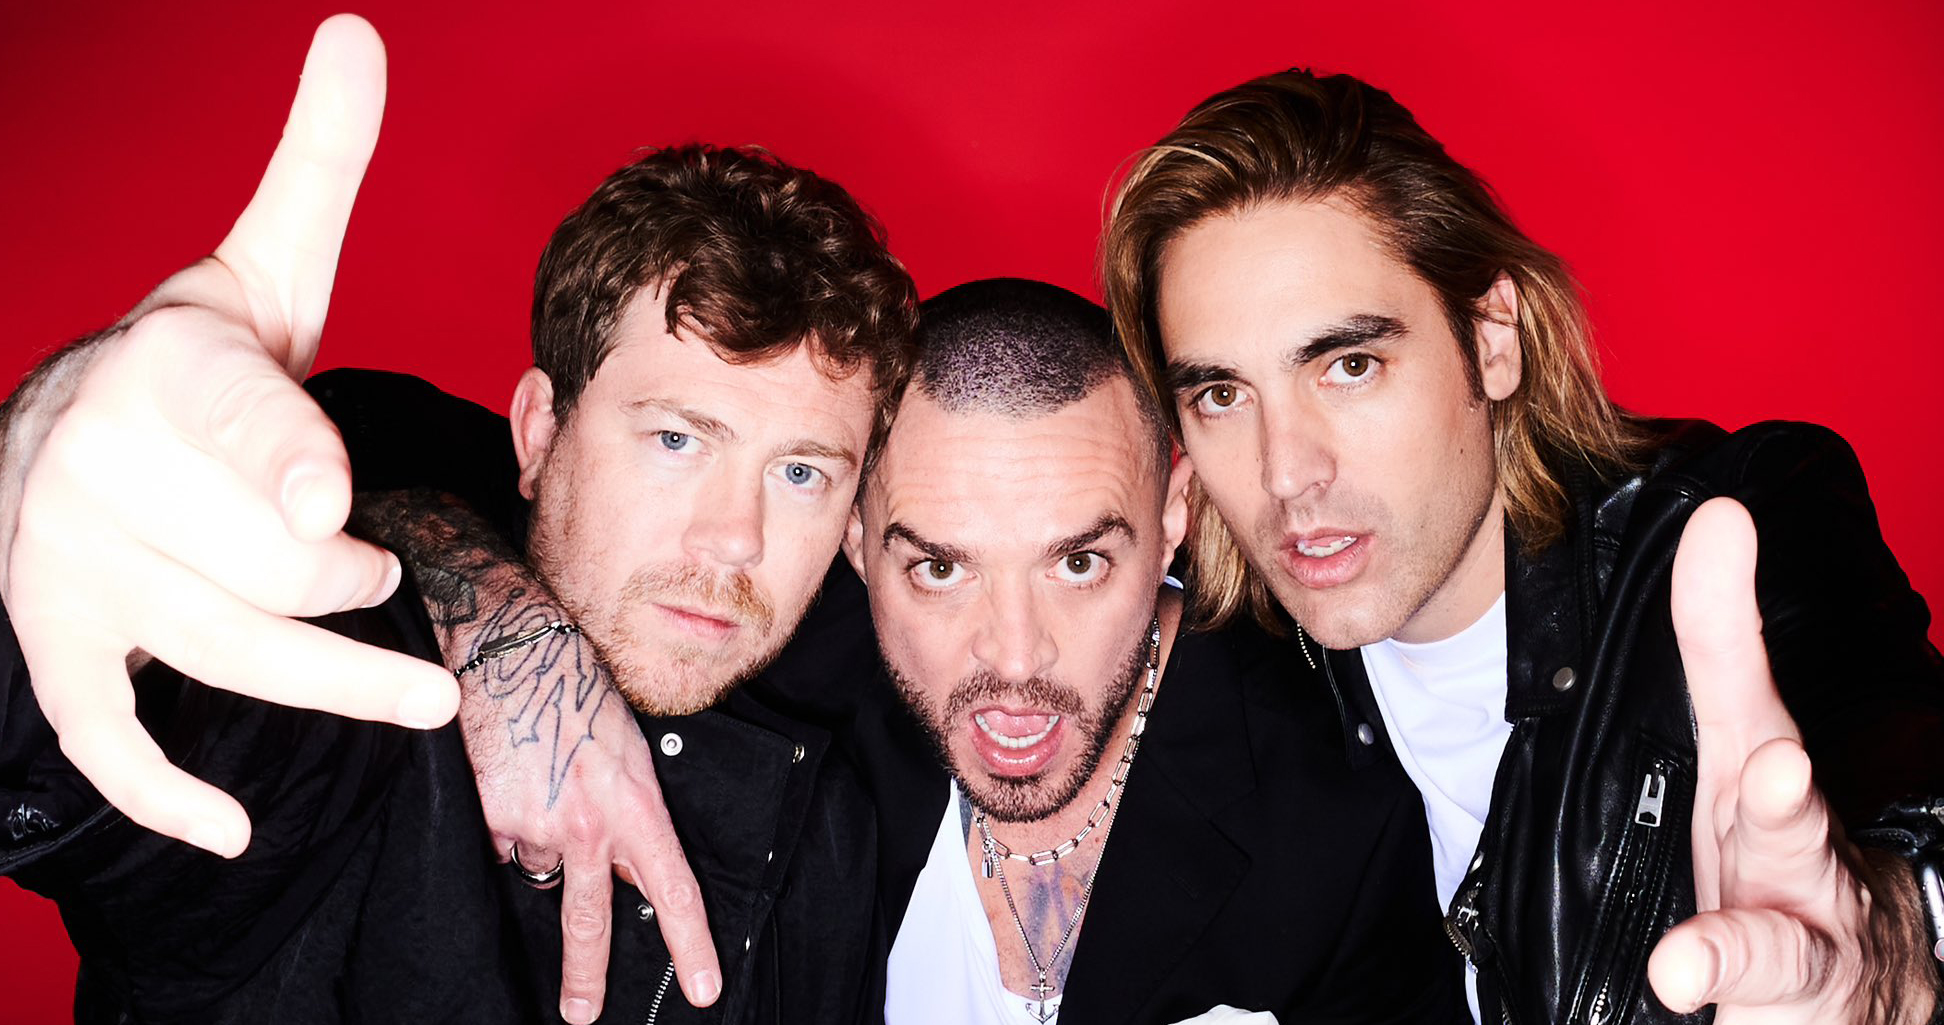 Busted announce Greatest Hits tour and new music